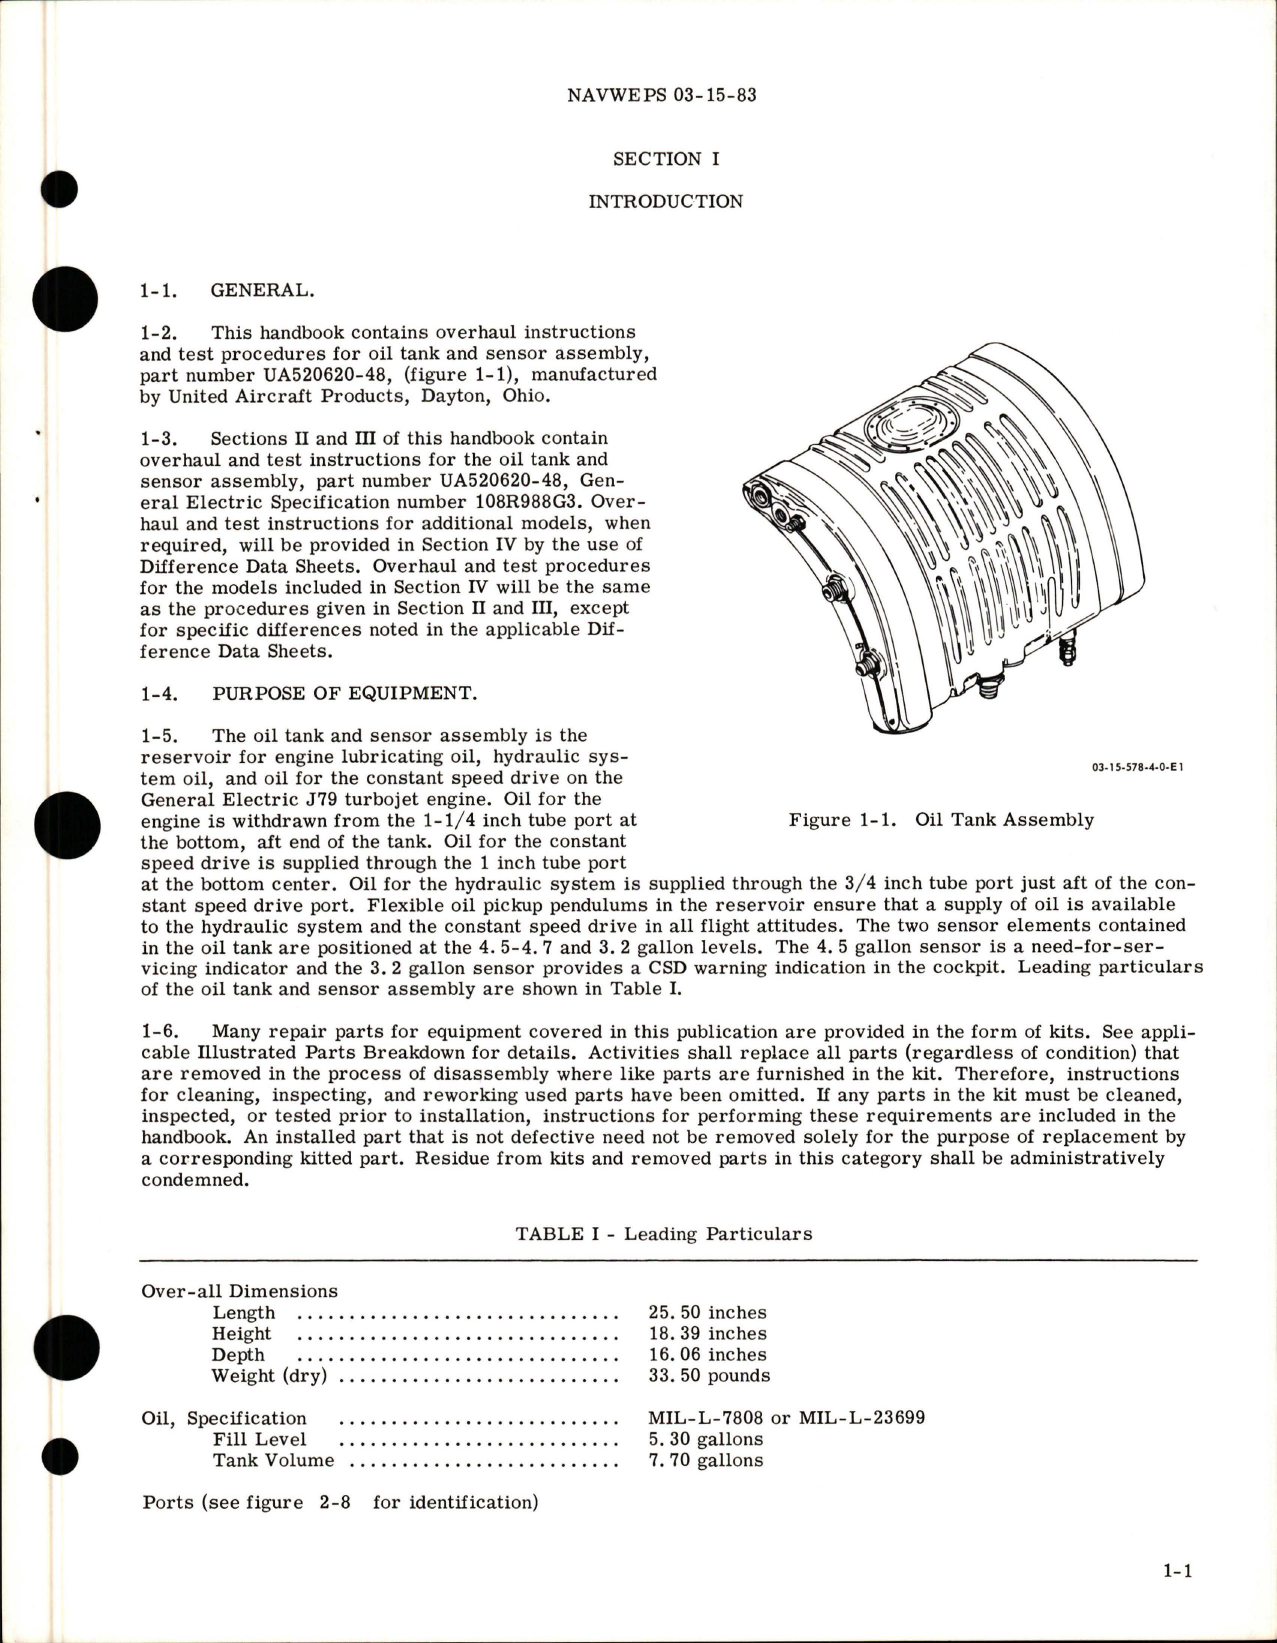 Sample page 5 from AirCorps Library document: Overhaul Instructions for Oil Tank and Sensor Assembly